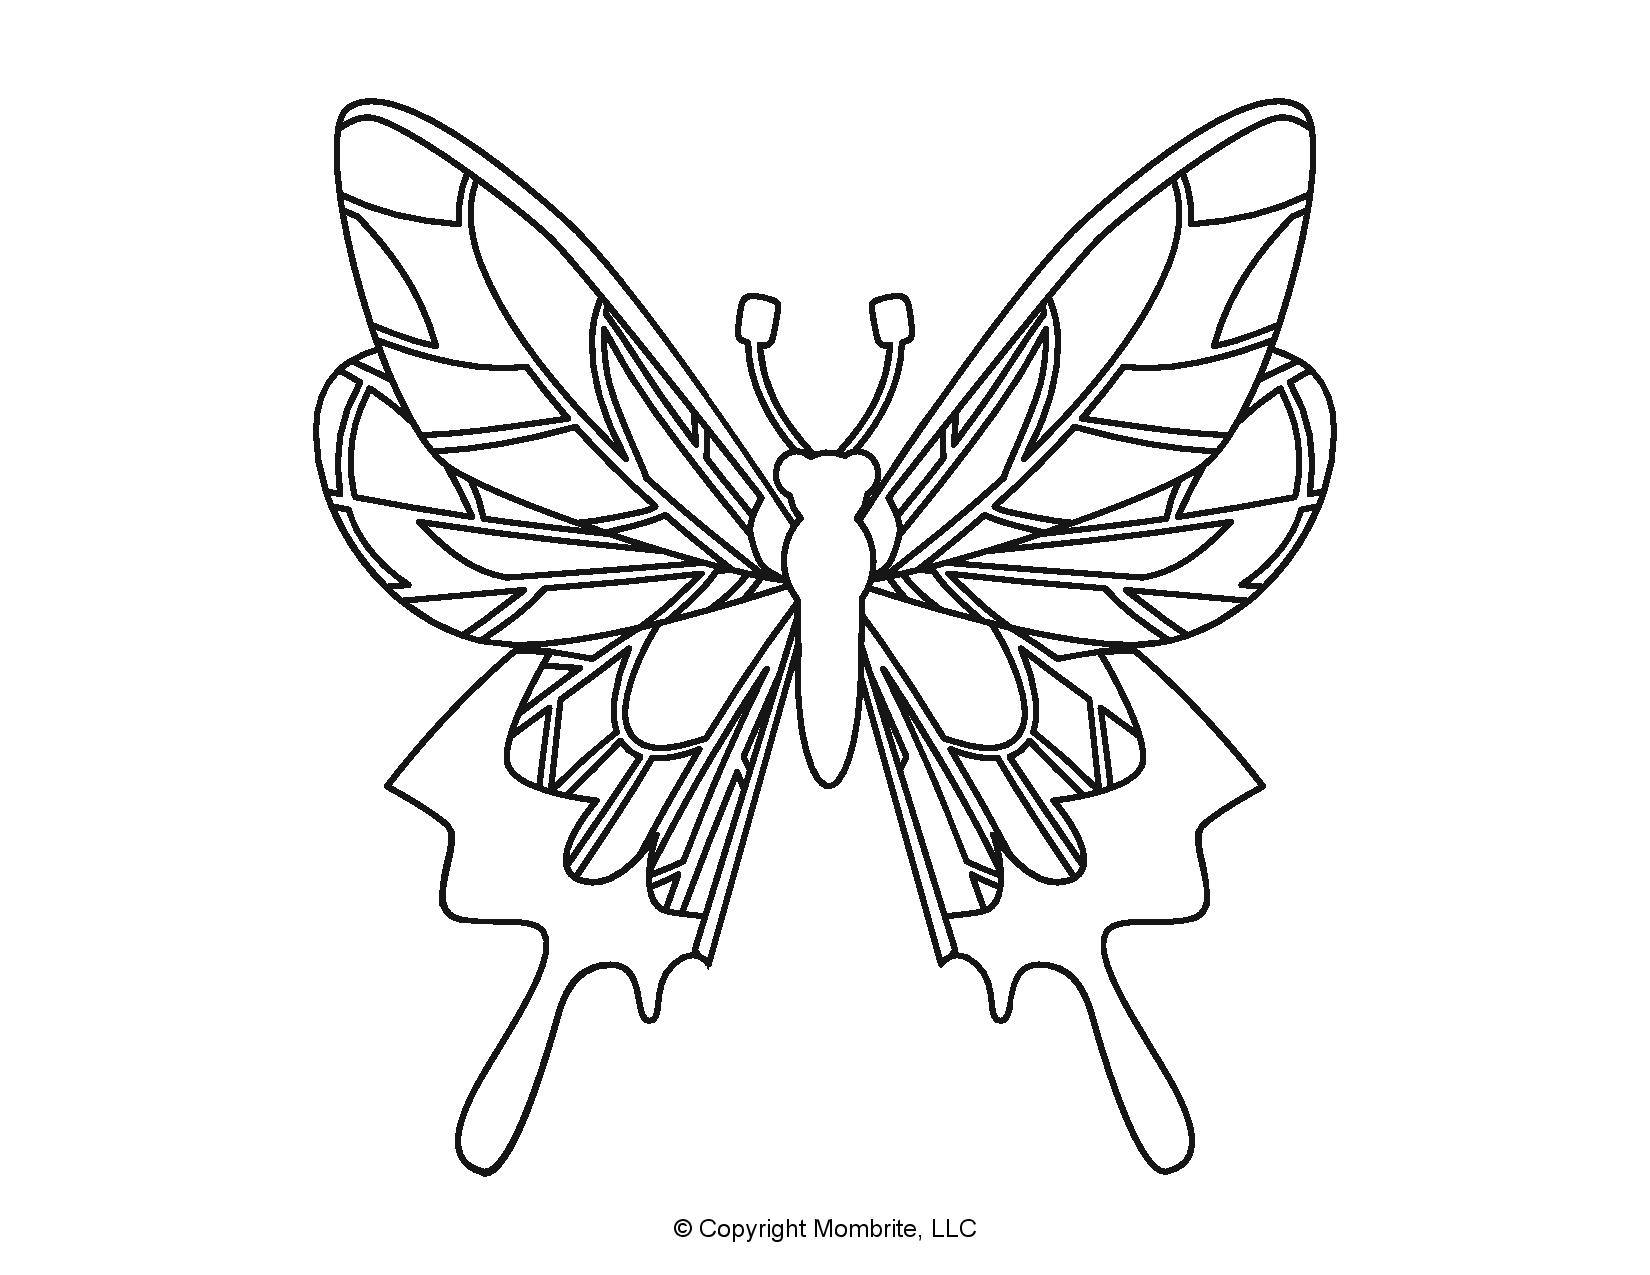 free printable butterfly templates